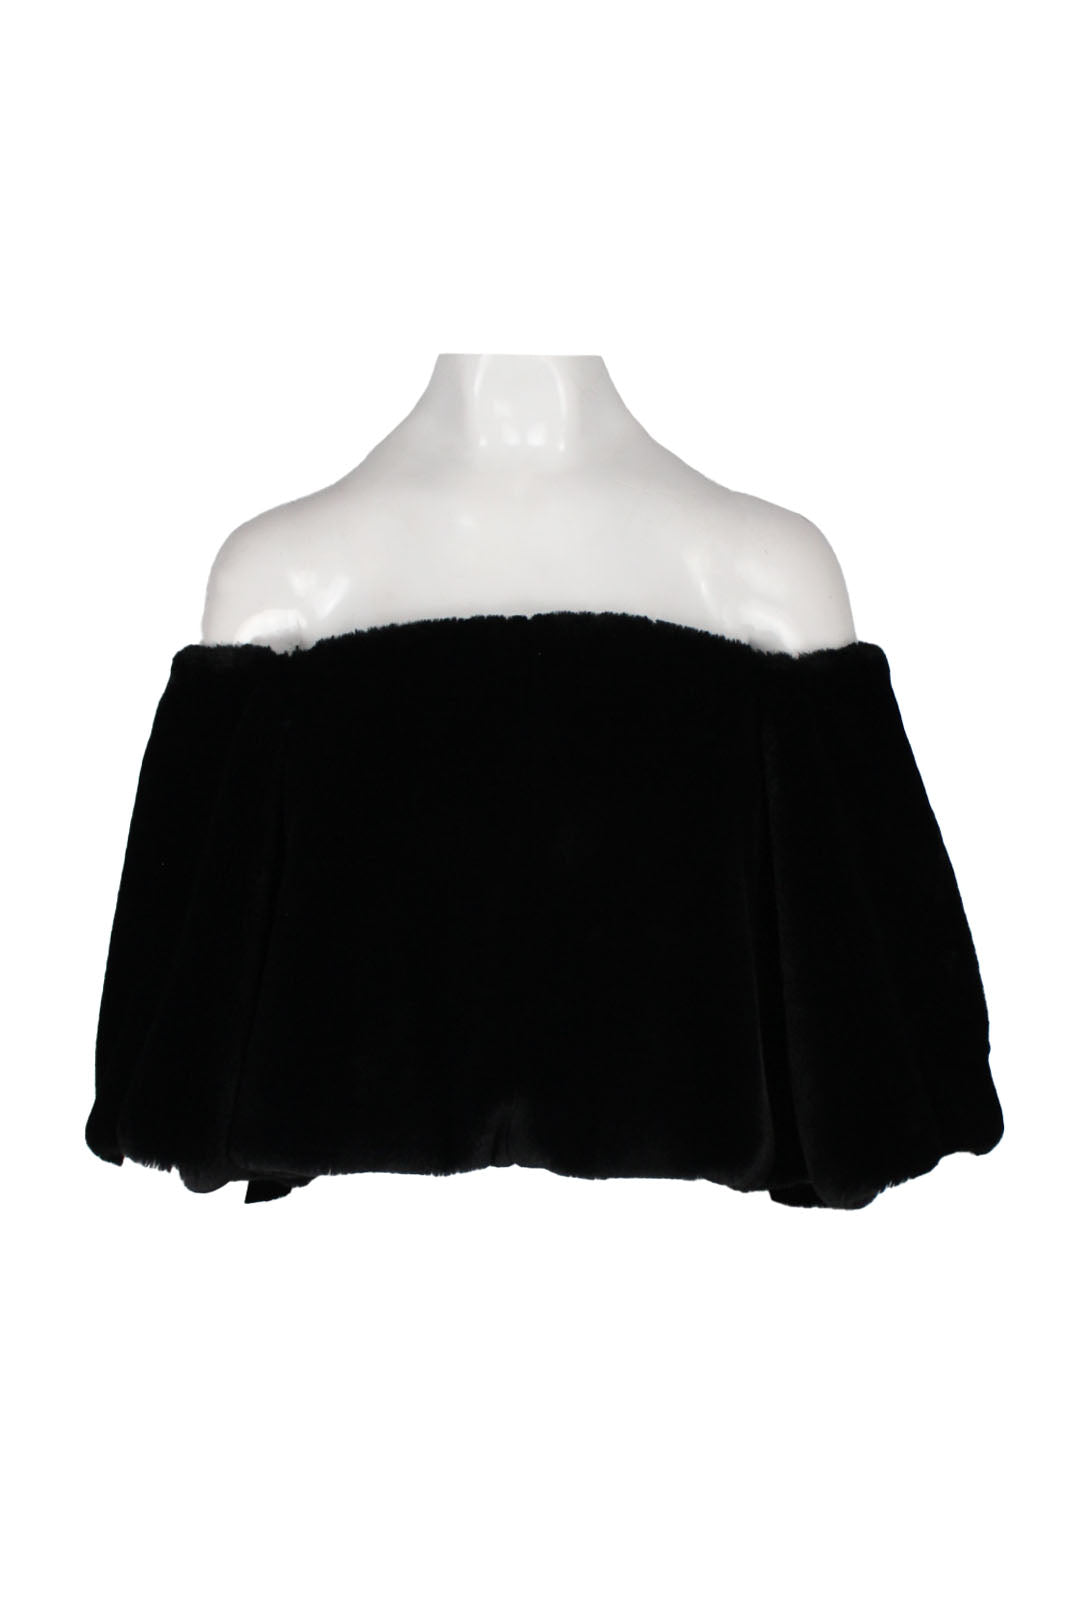 description: house of fluff black faux fur chunky infinity scarf cowl shrug. features slip on style, elastic on shoulder hem, and cropped length. 